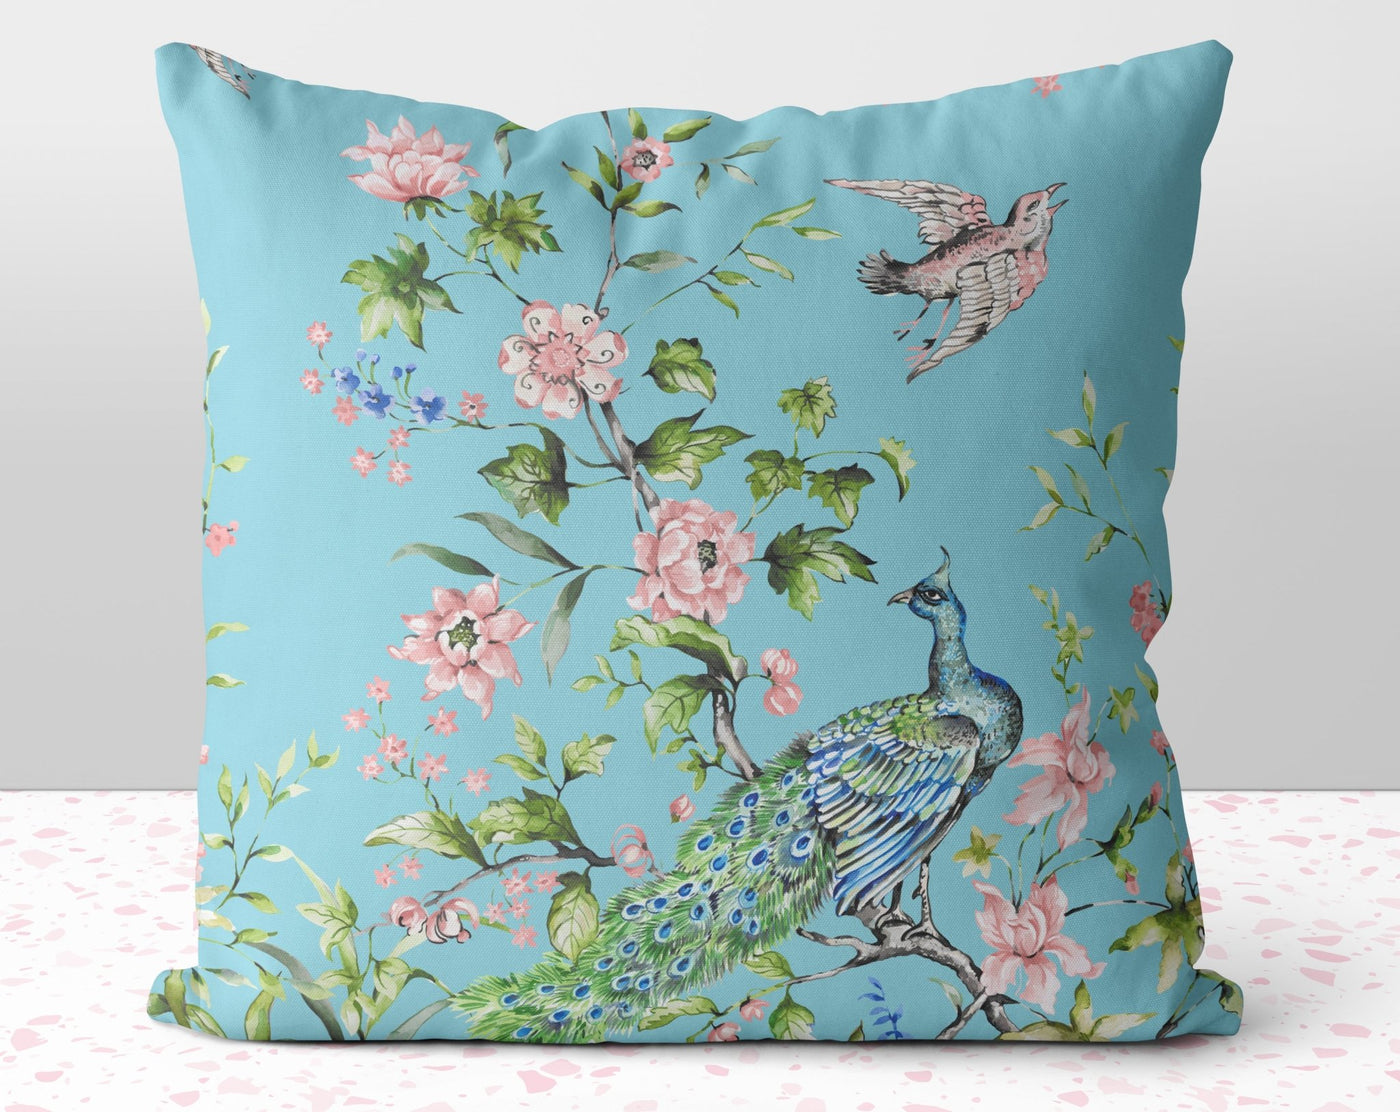 Floral Peacock Chinoiserie Pink Flowers on Teal Pillow Throw Cover with Insert - Cush Potato Pillows